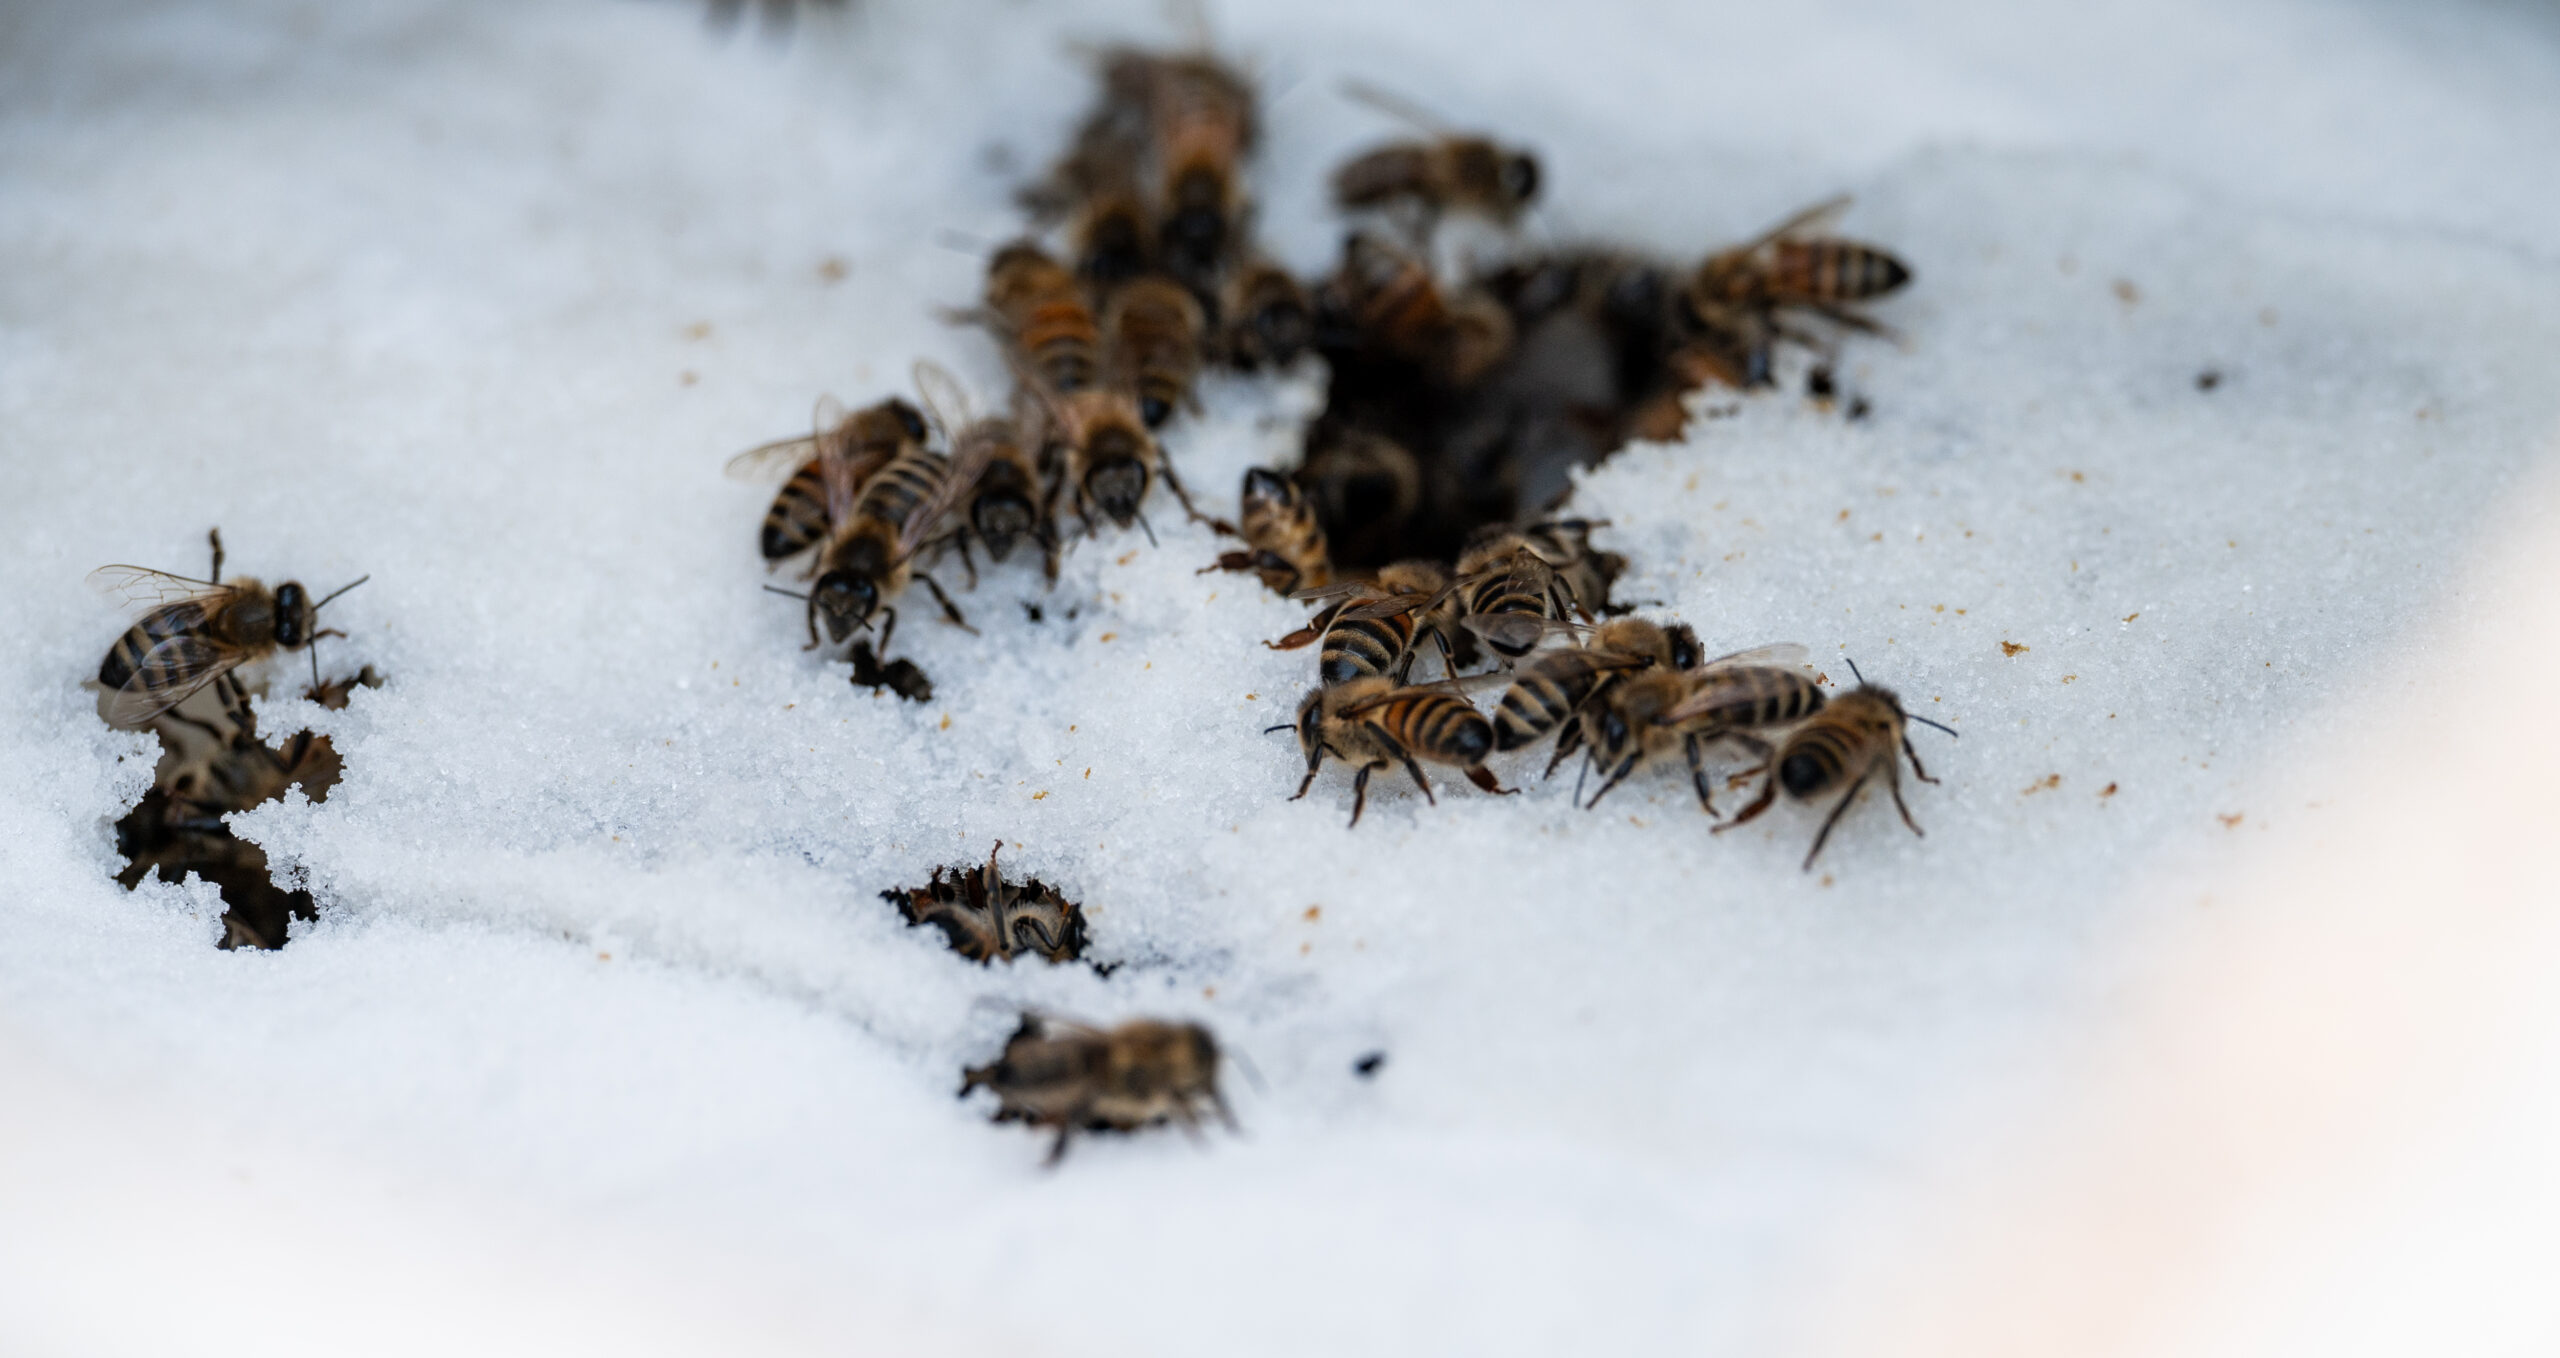 A group of bees in the snow